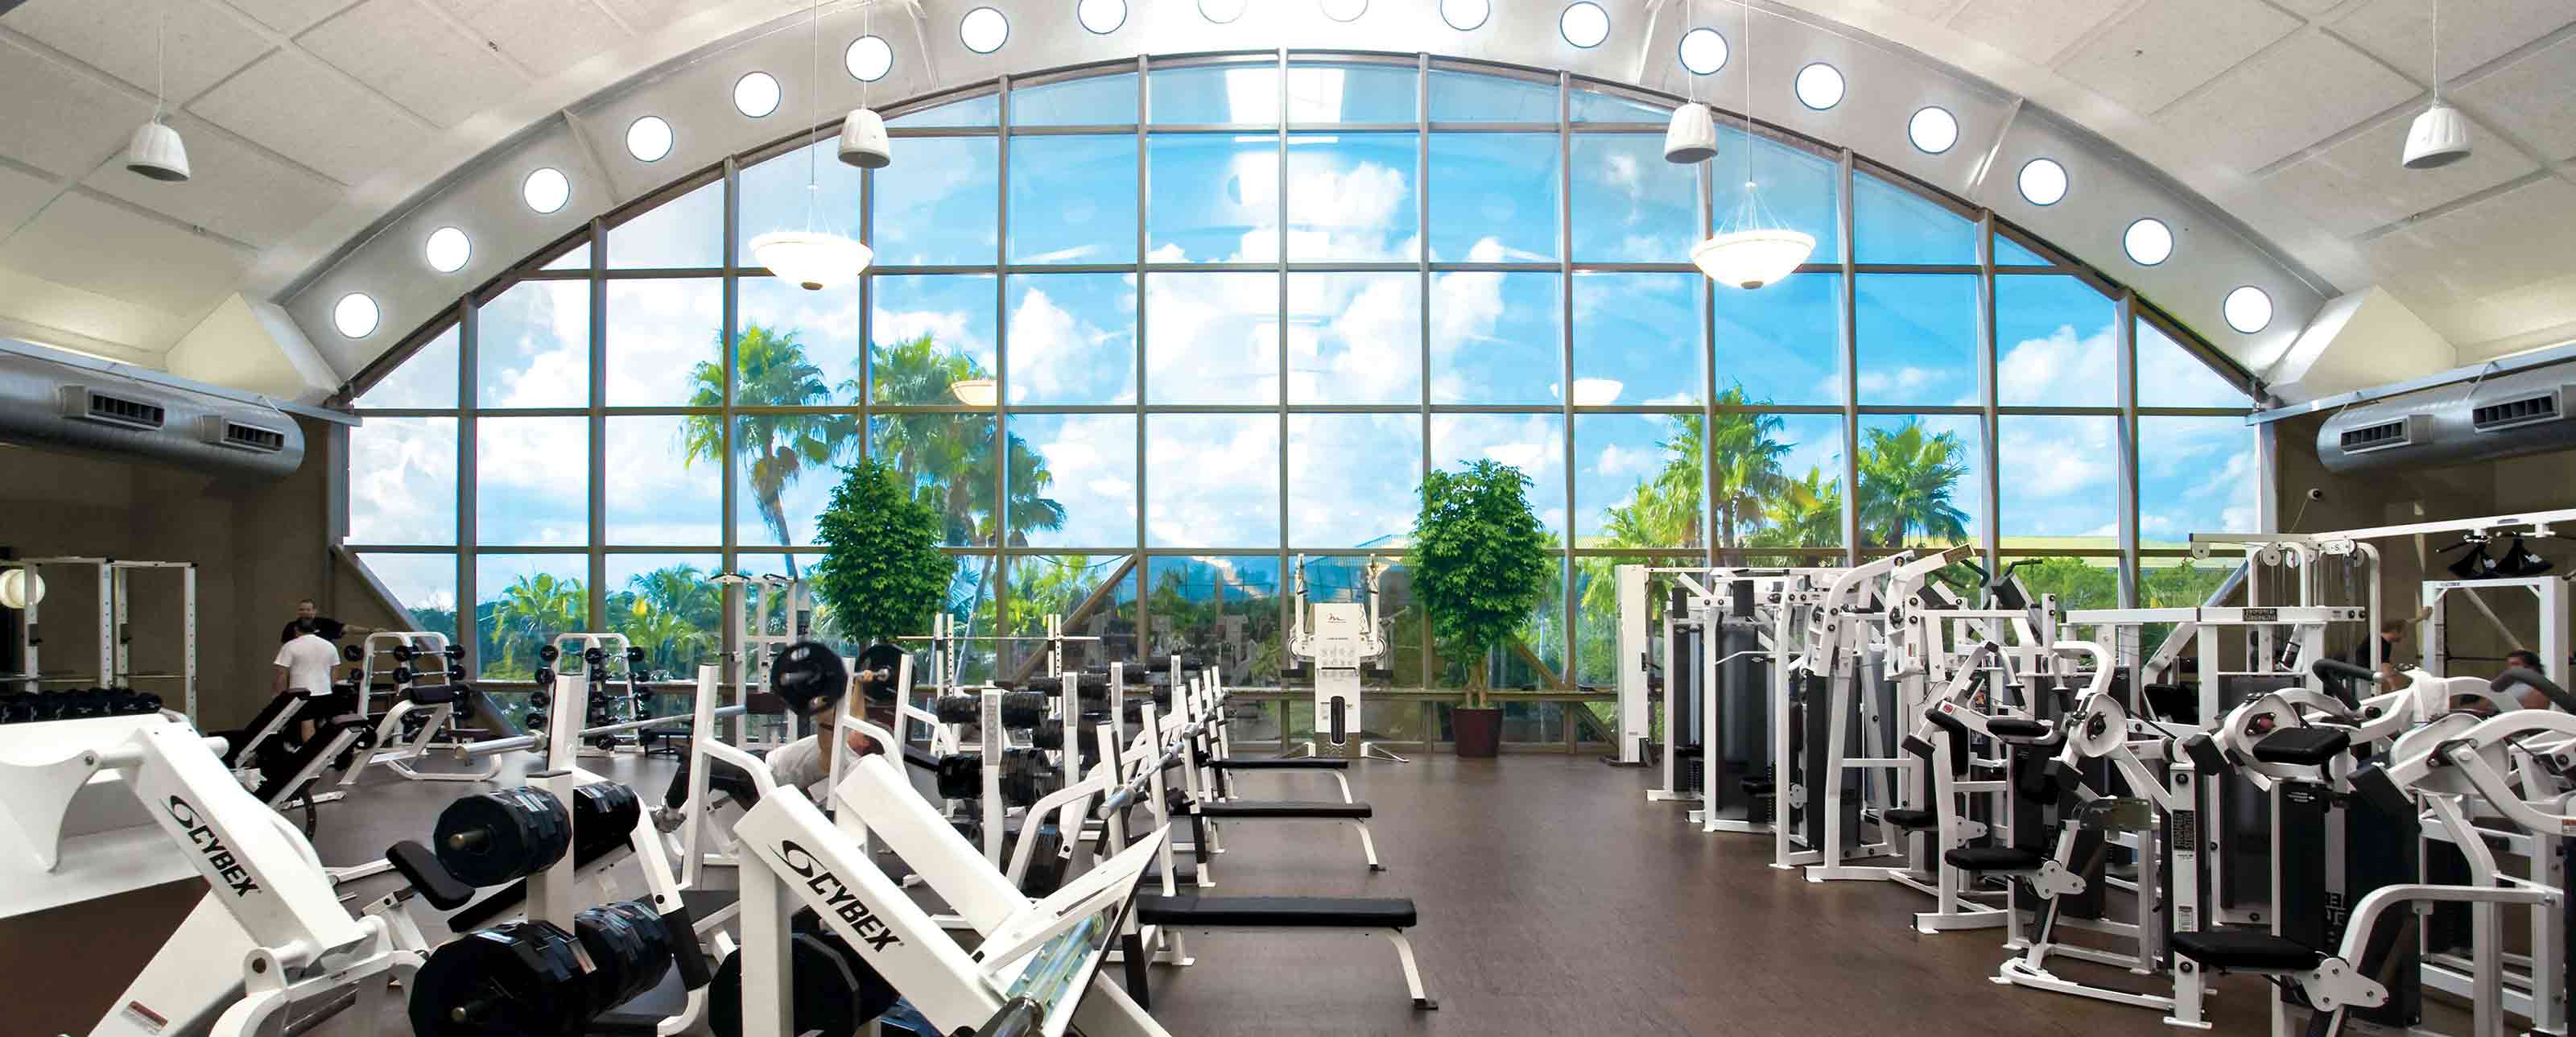 The expansive fitness floor with weight machines at Life Time Boca Raton